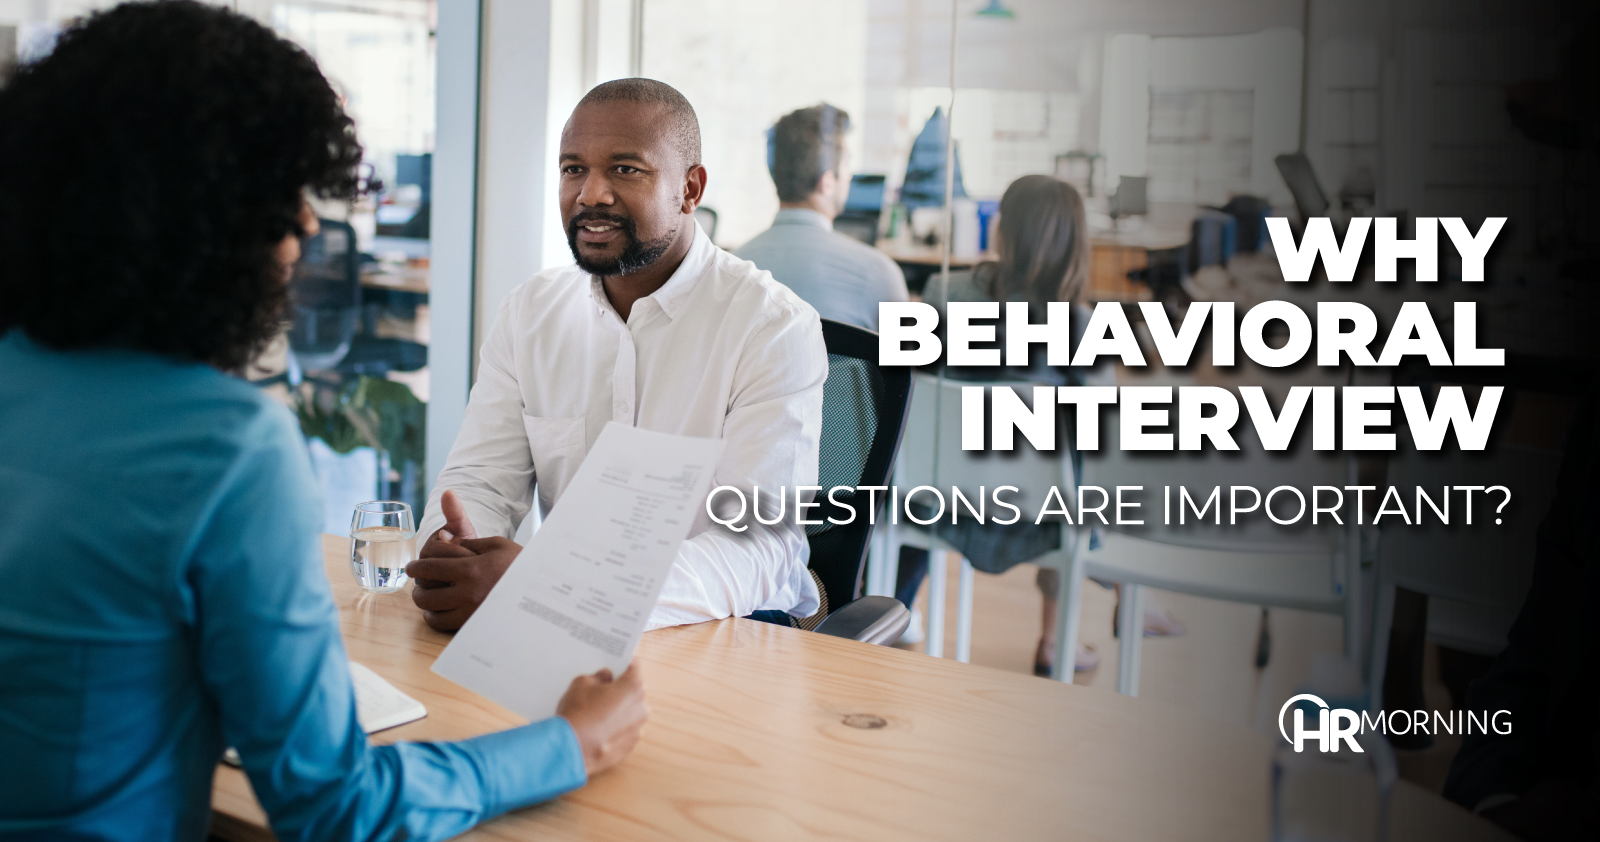 Why behavioral interview questions are important